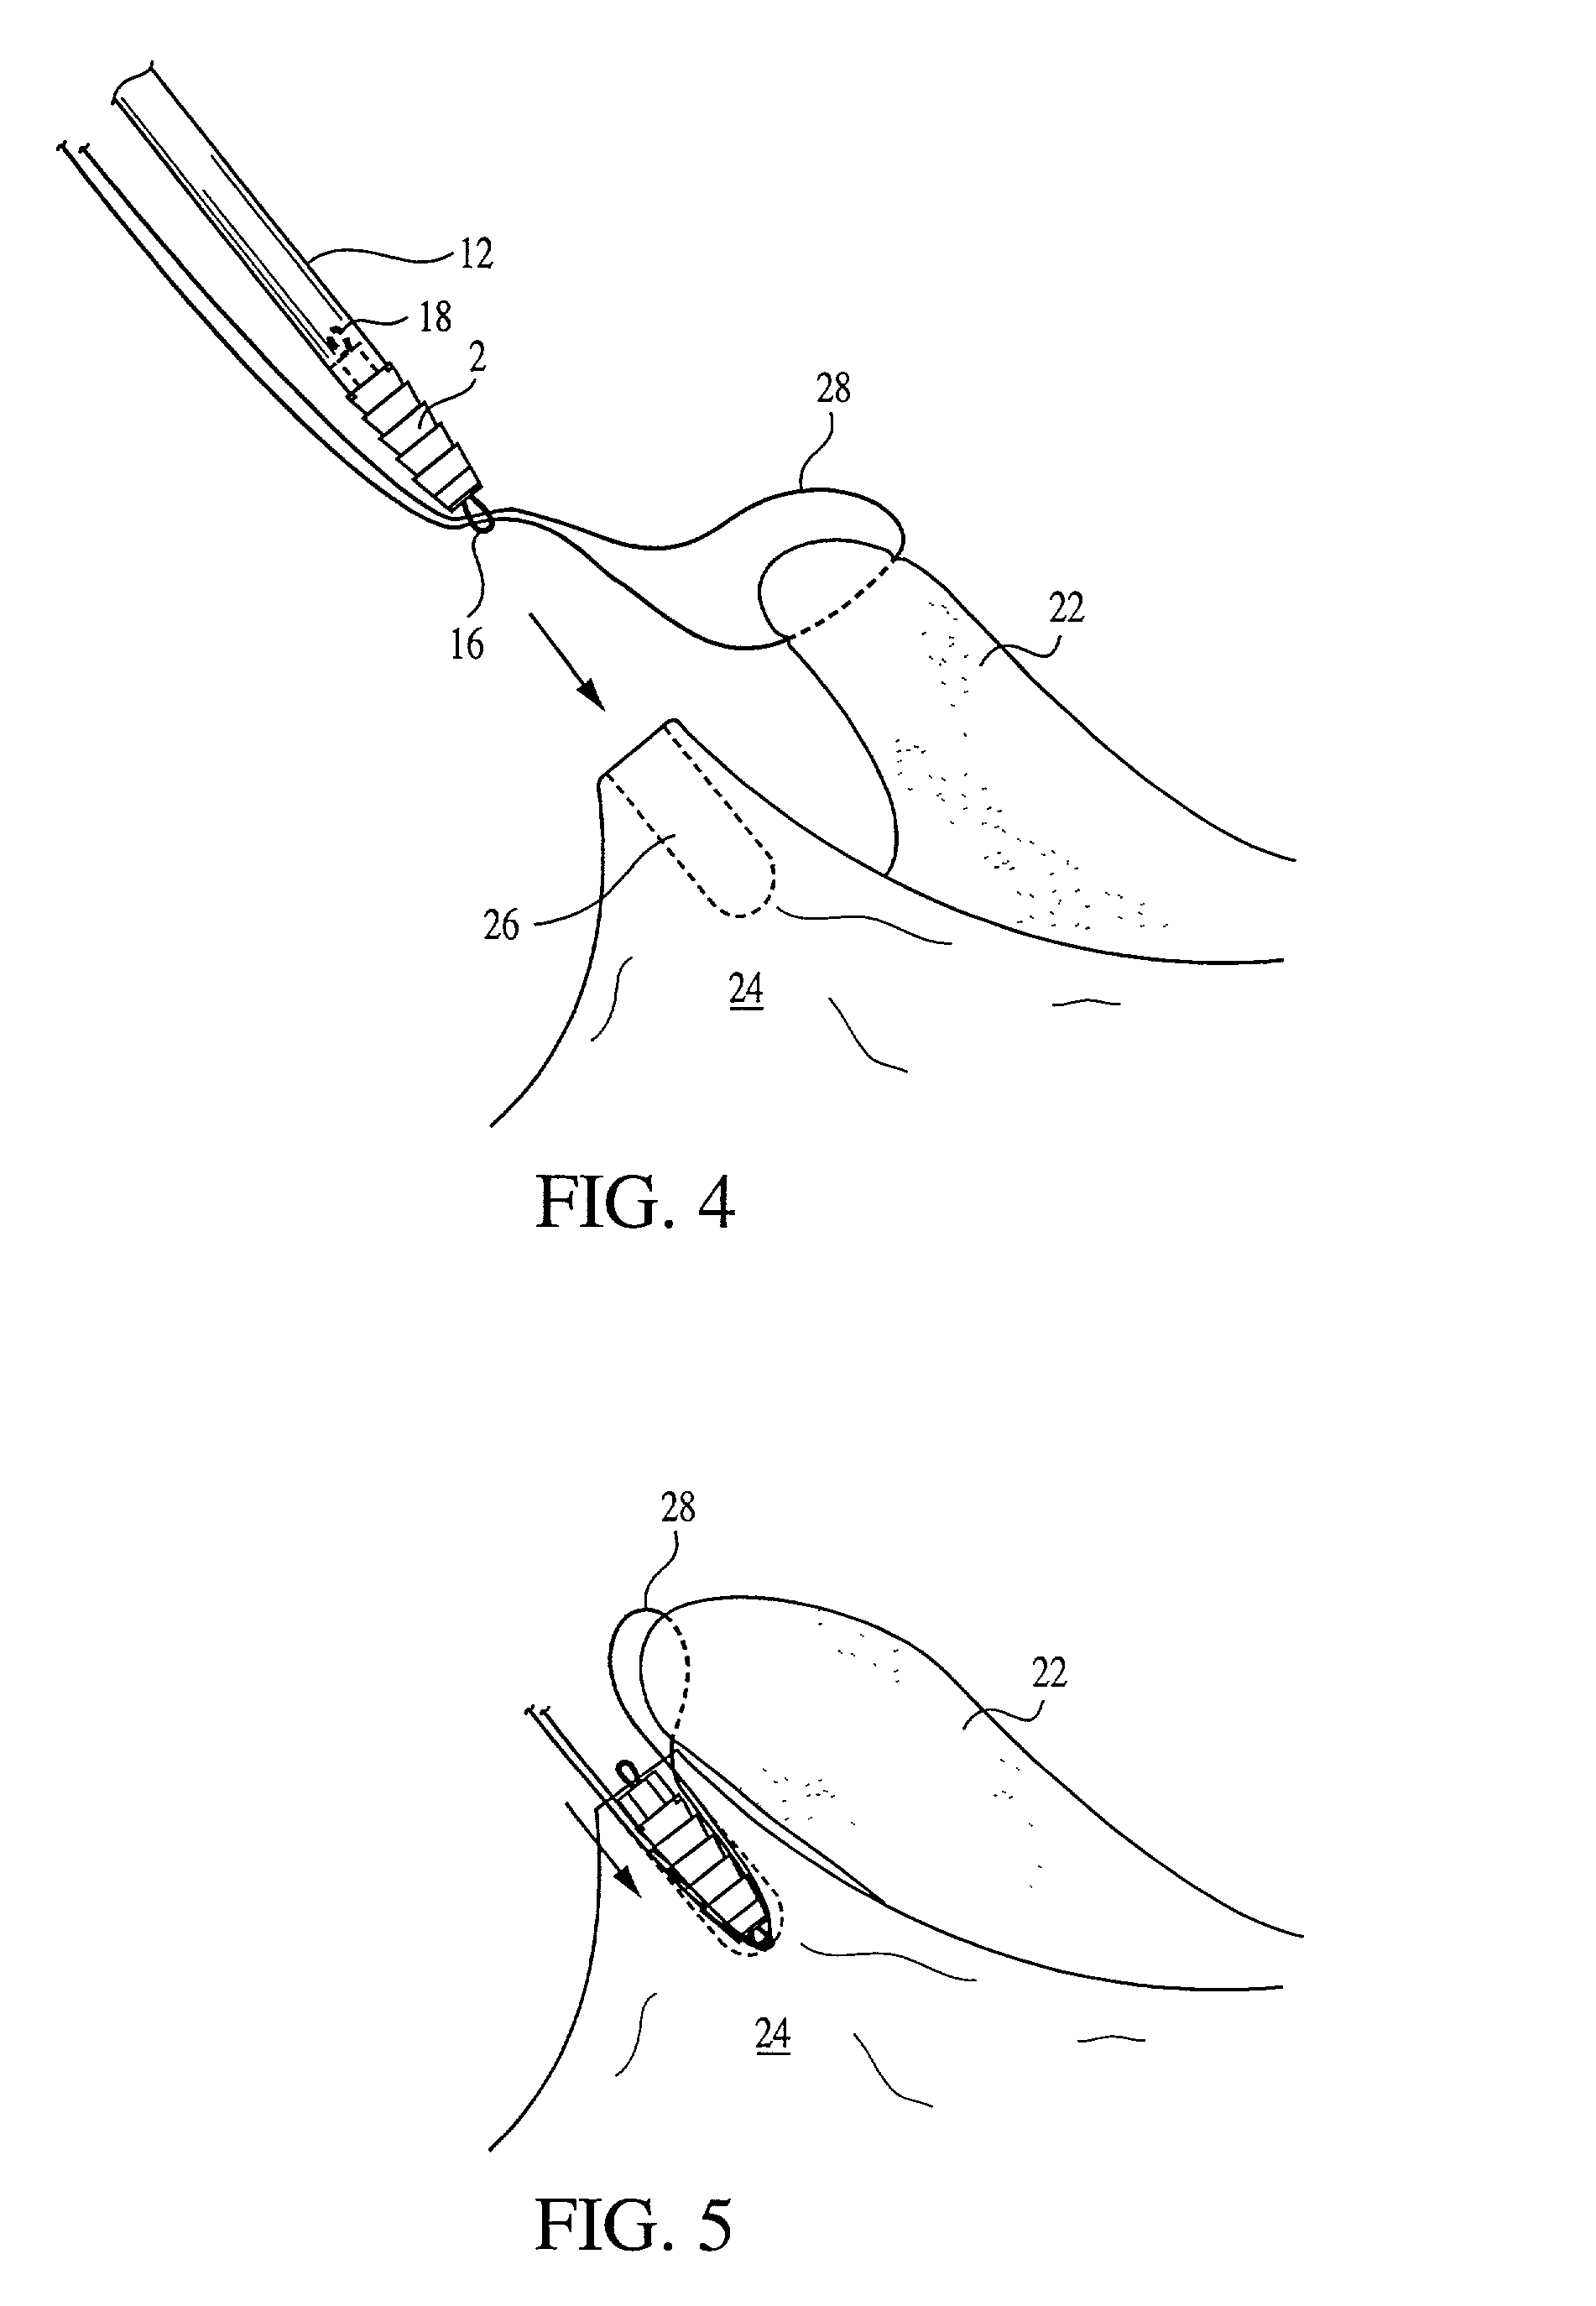 Interference fit knotless suture anchor fixation